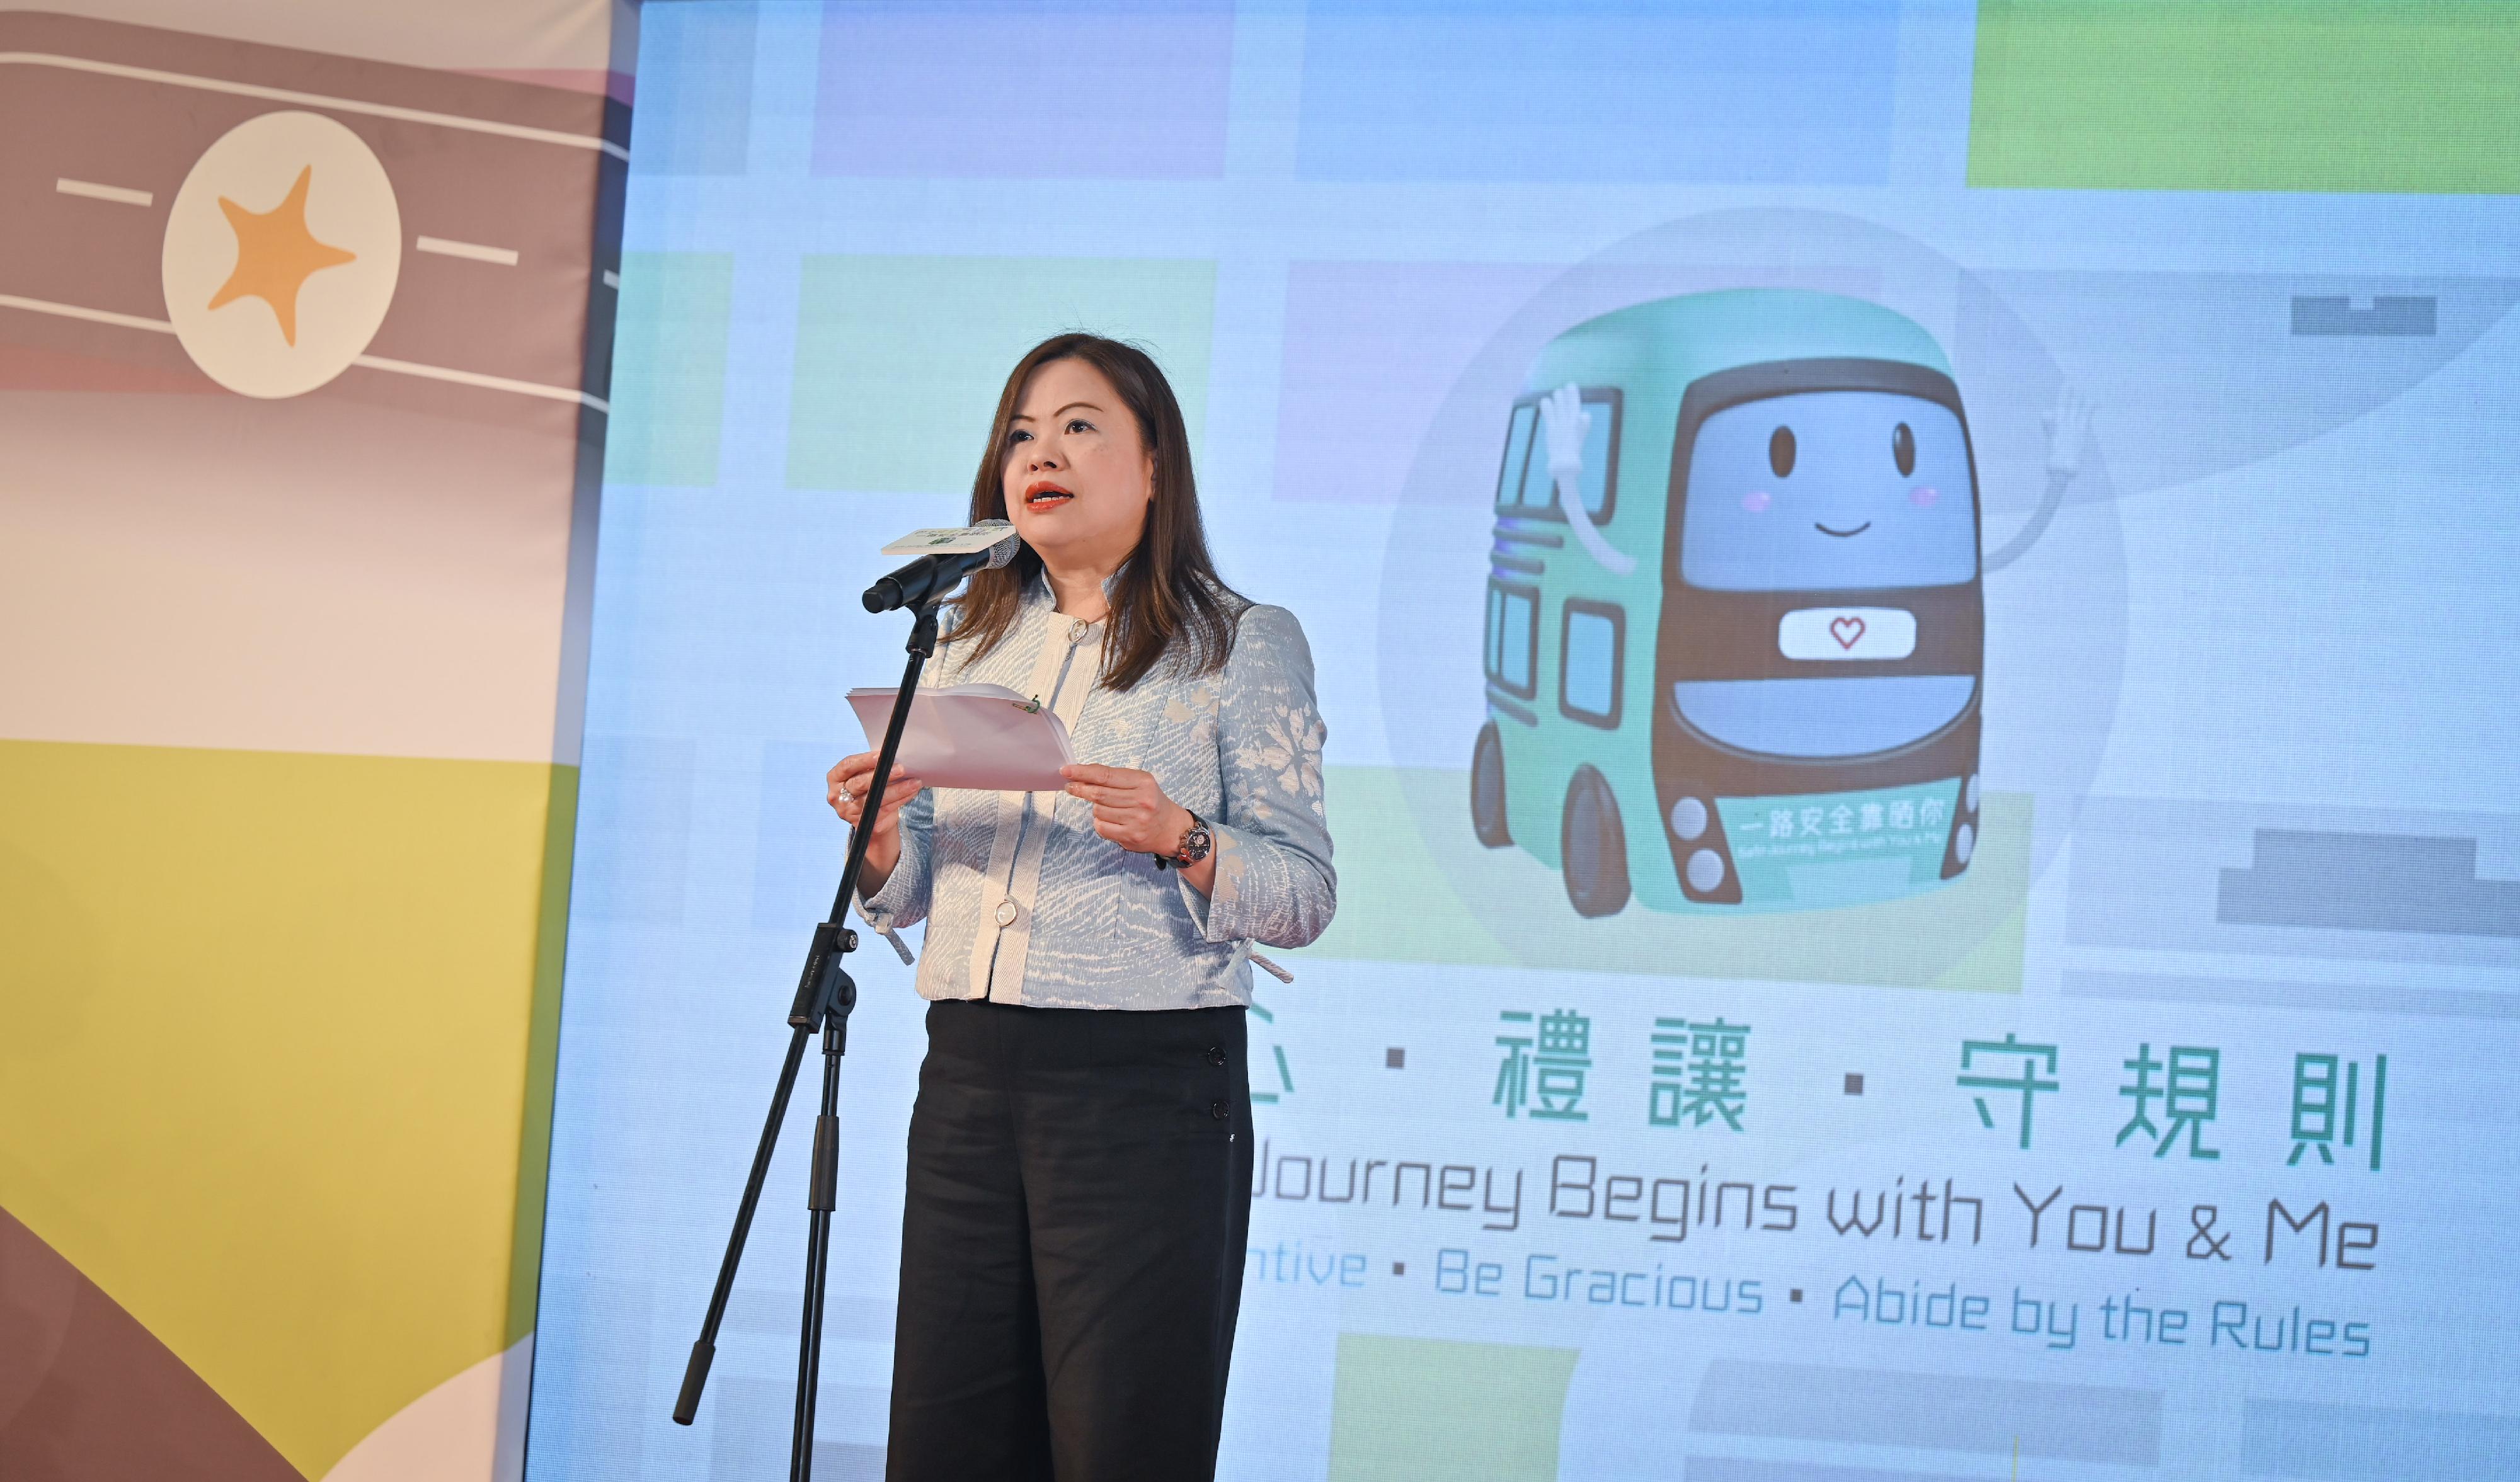 Speaking at the kick-off ceremony for the Bus Safety Campaign today (April 28), the Commissioner for Transport, Miss Rosanna Law, says that millions of passengers commute by franchised buses daily. They want to be assured that they can get to their destinations safely and smoothly. Therefore it is important to make bus rides safe.